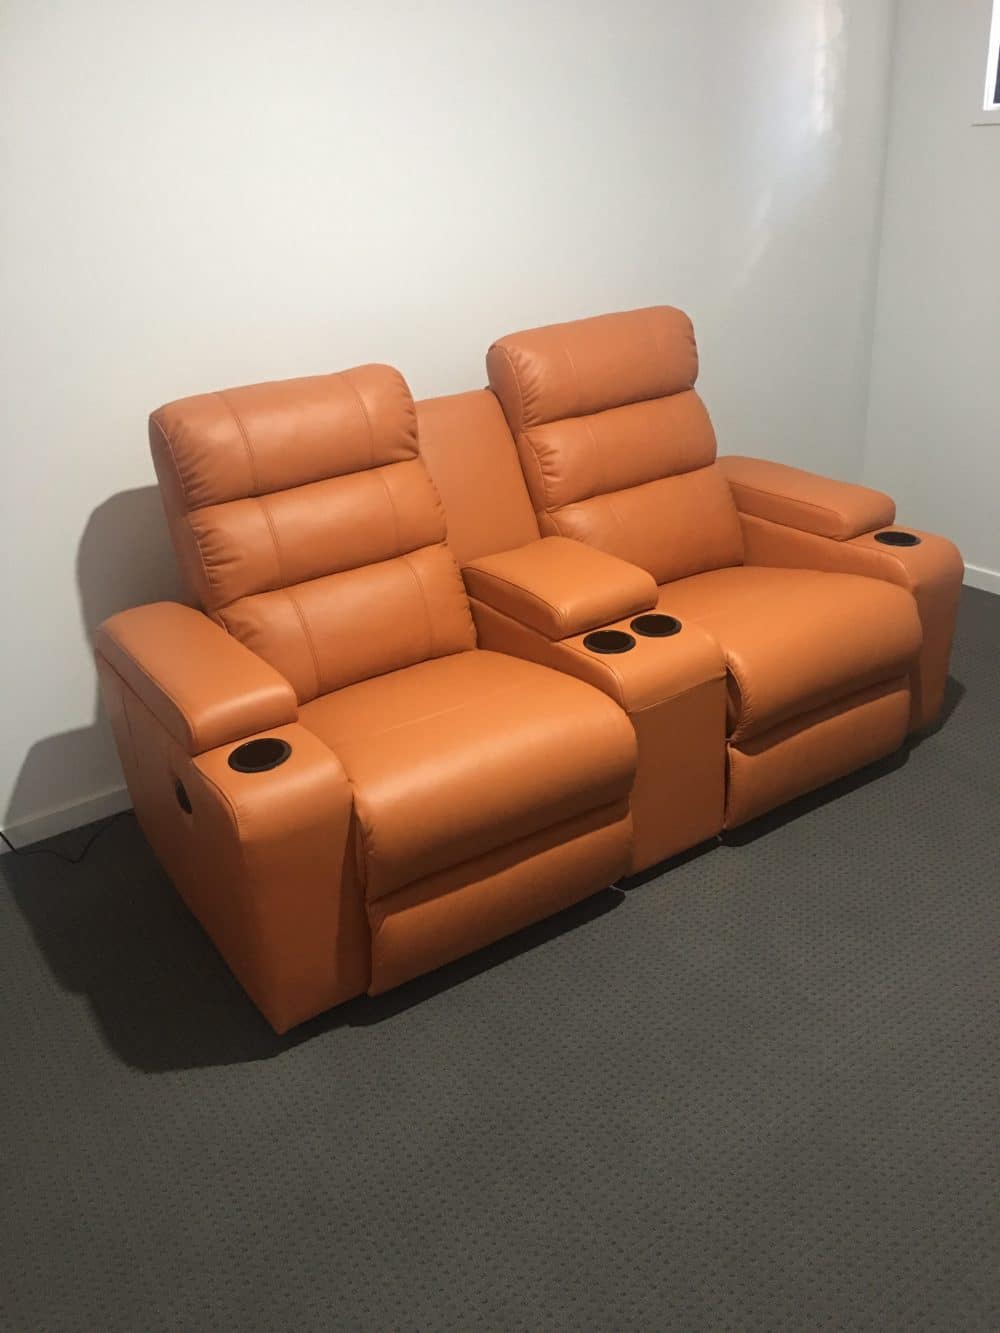 Home Theatre Seating Ht Nova, Leather Theatre Chairs